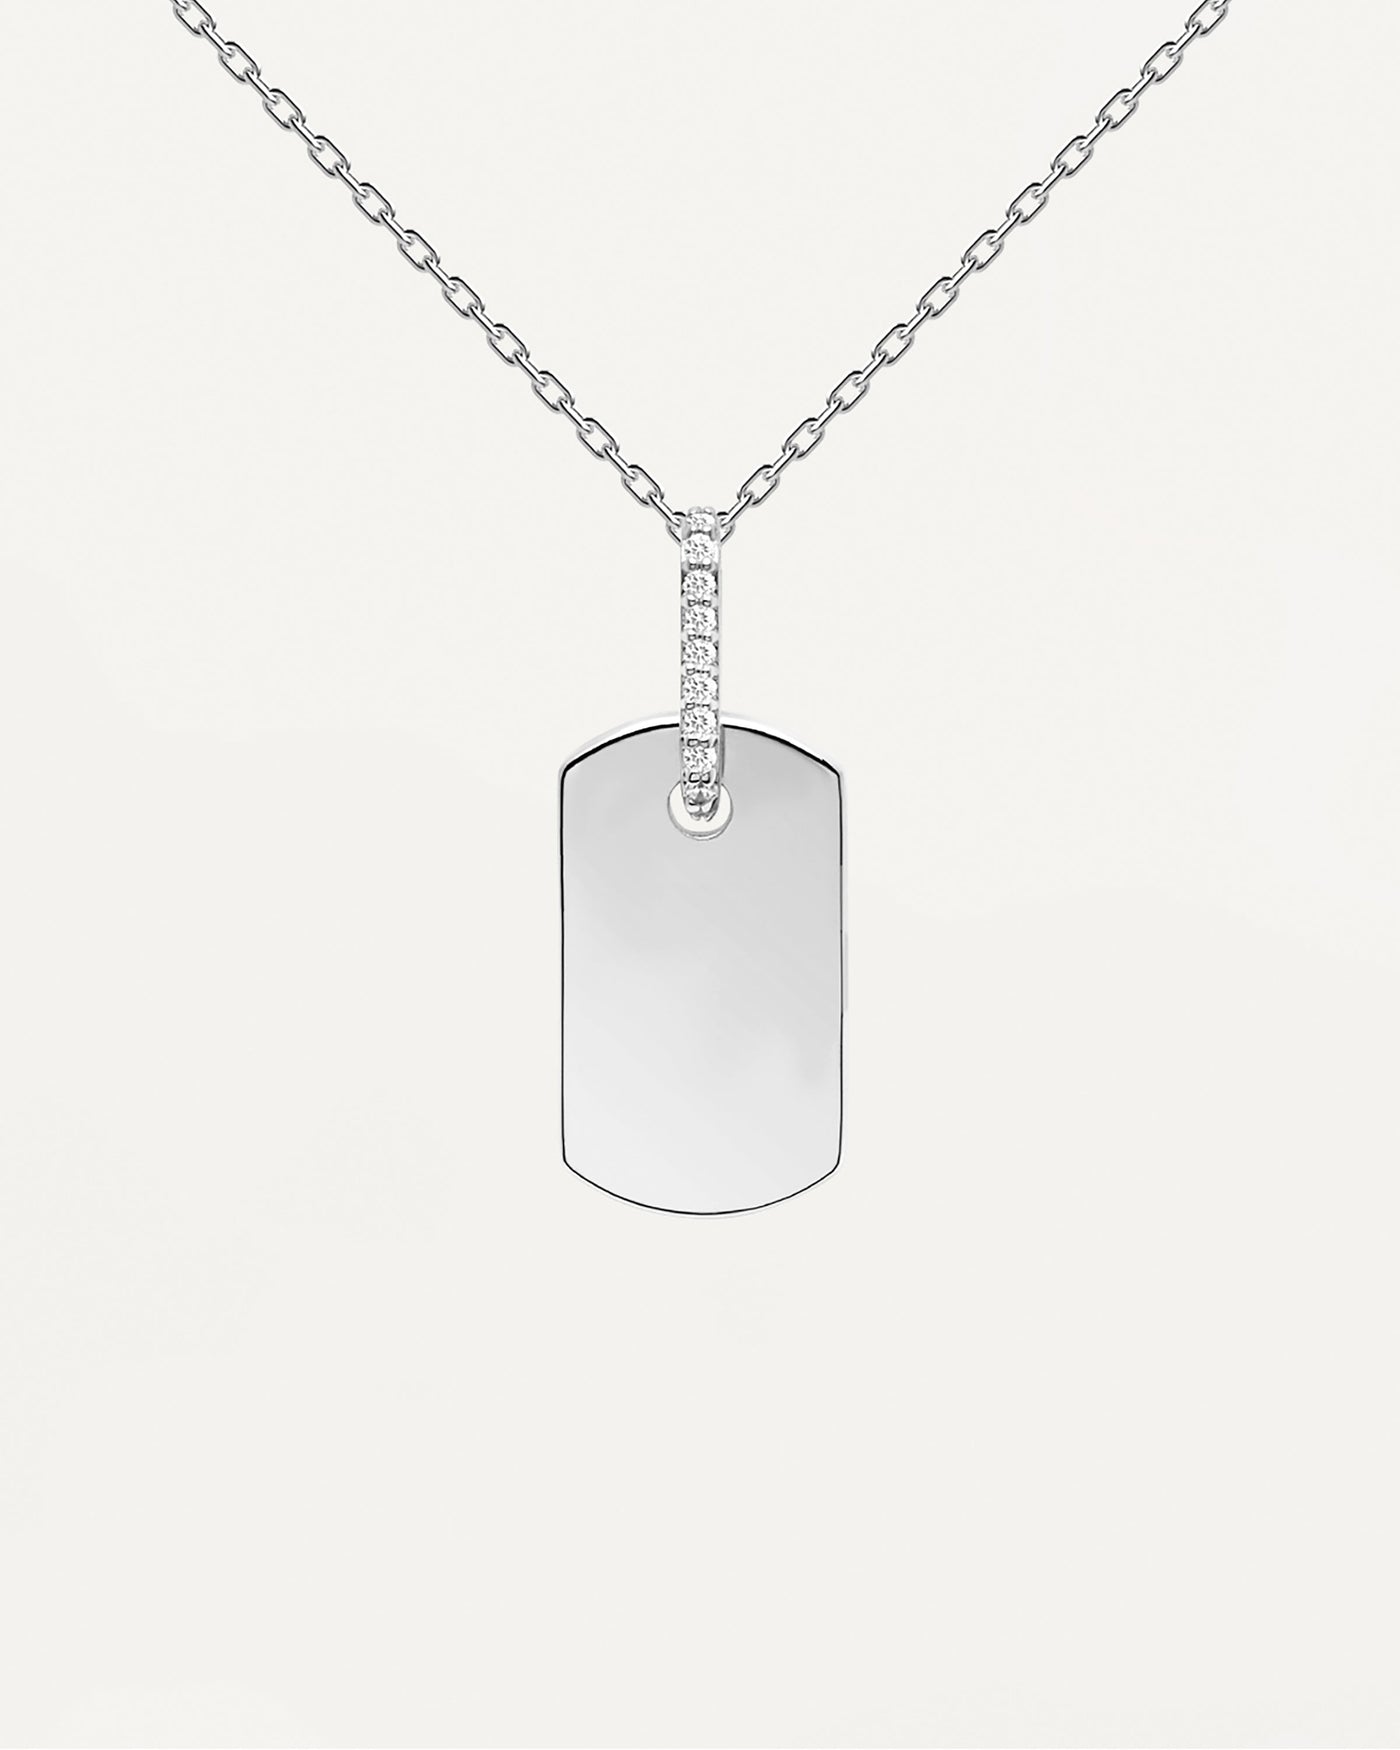 2023 Selection | Talisman Silver Necklace. Personalized necklace in sterling silver with engravable plate hanging from white zirconia. Get the latest arrival from PDPAOLA. Place your order safely and get this Best Seller. Free Shipping.